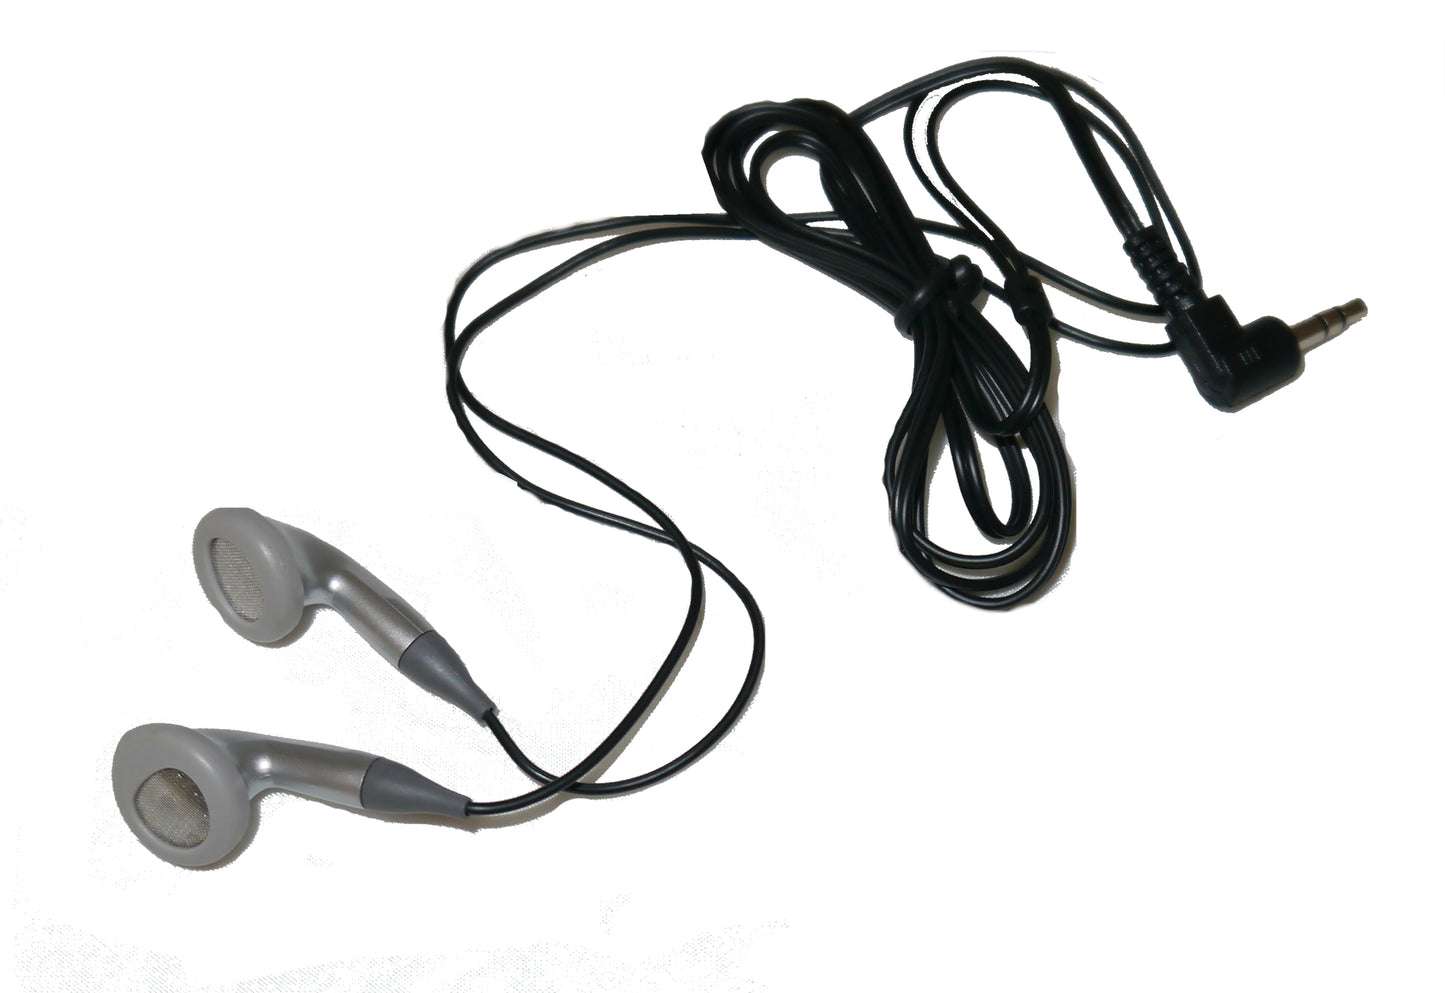 Clear Sounds EARBUDS 3.5mm Stereo Earbuds